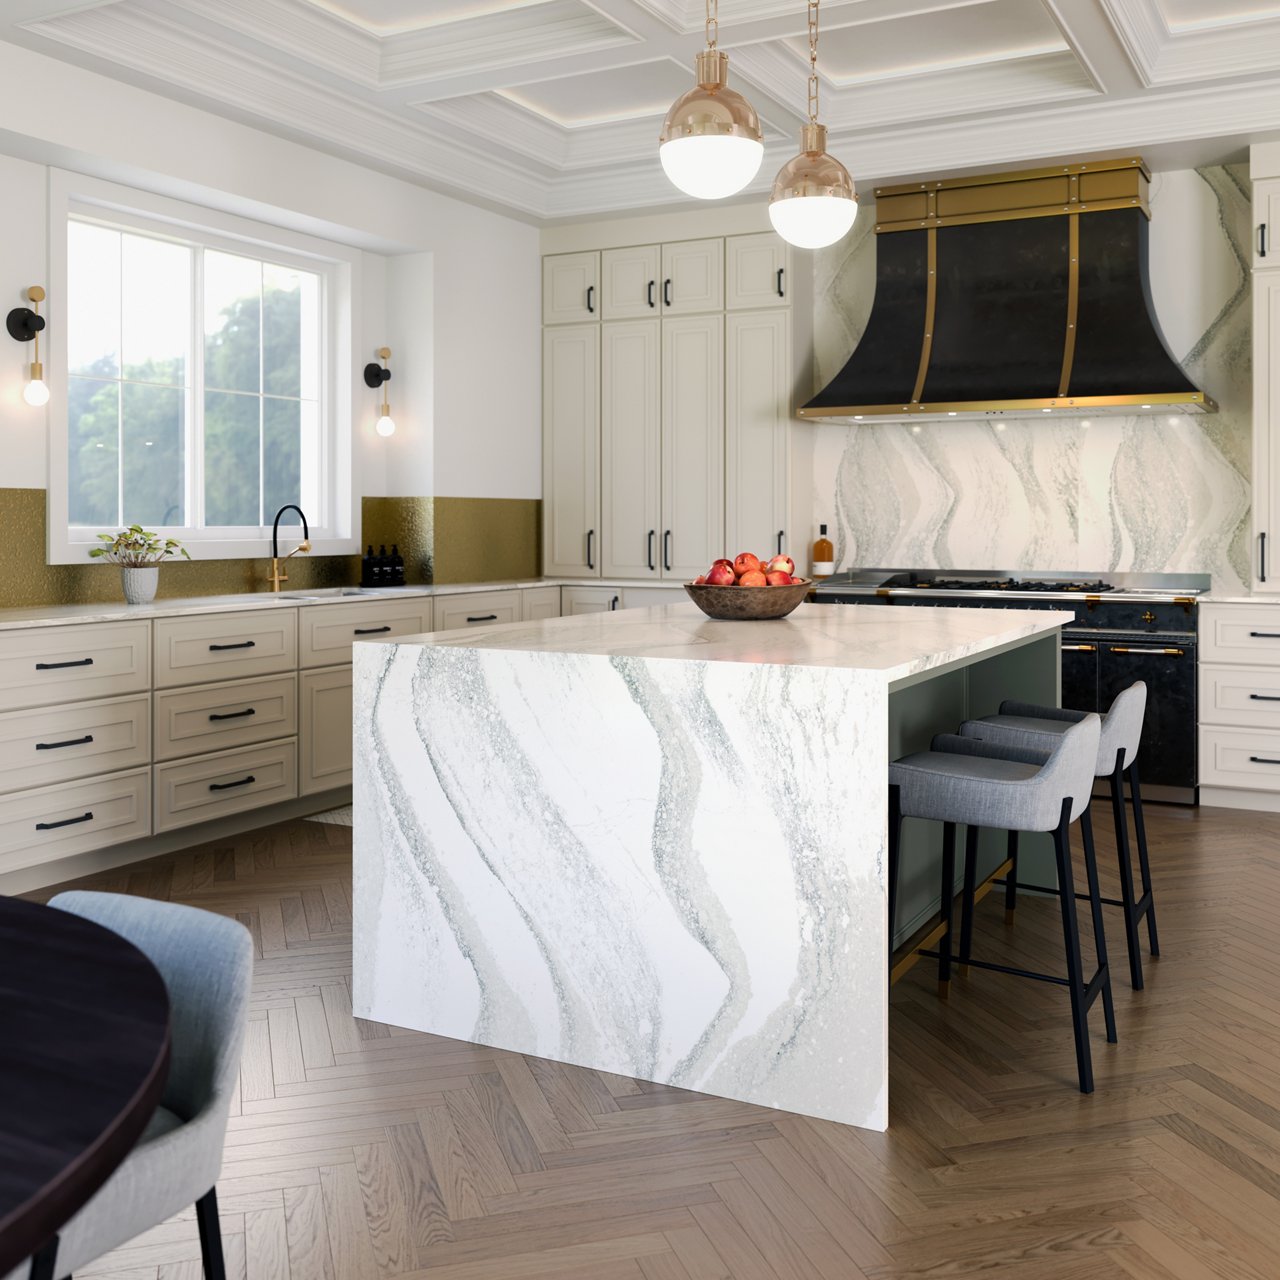 A modern kitchen with a double waterfall edge island made from white quartz, matching white quartz backsplash, white cabinets, and black and gold accents throughout.